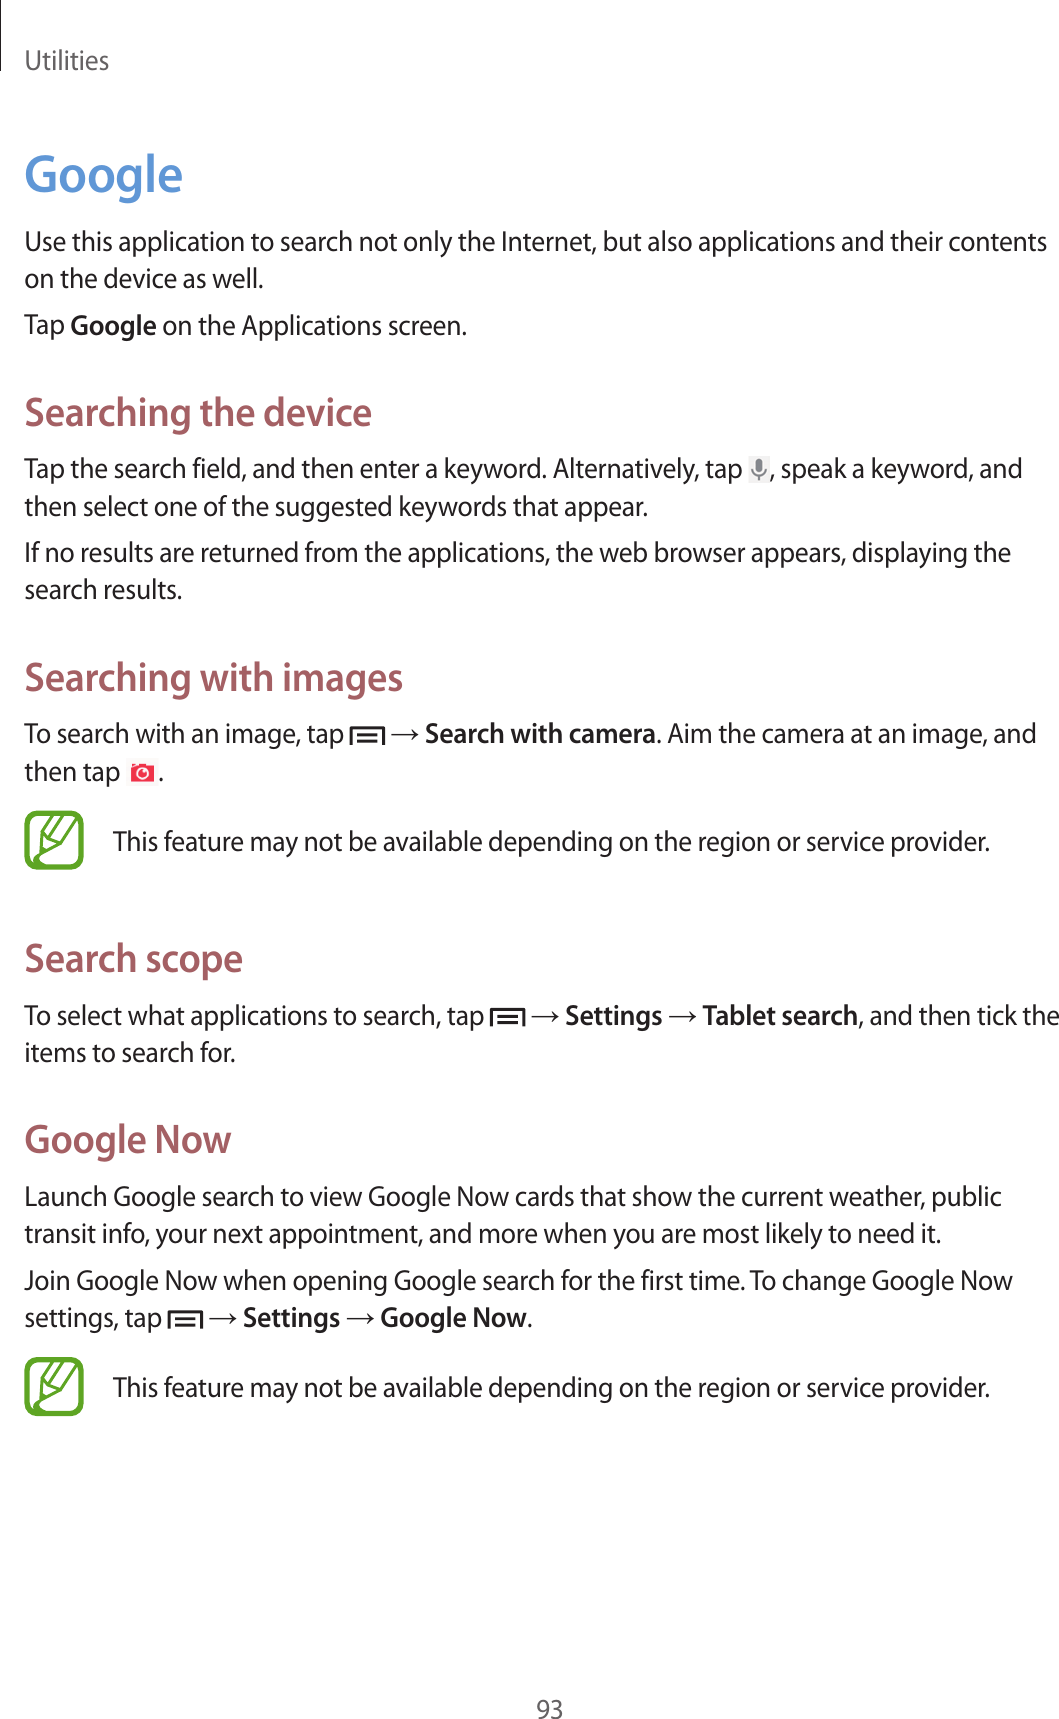 Utilities93GoogleUse this application to search not only the Internet, but also applications and their contents on the device as well.Tap Google on the Applications screen.Searching the deviceTap the search field, and then enter a keyword. Alternatively, tap  , speak a keyword, and then select one of the suggested keywords that appear.If no results are returned from the applications, the web browser appears, displaying the search results.Searching with imagesTo search with an image, tap   → Search with camera. Aim the camera at an image, and then tap  .This feature may not be available depending on the region or service provider.Search scopeTo select what applications to search, tap   → Settings → Tablet search, and then tick the items to search for.Google NowLaunch Google search to view Google Now cards that show the current weather, public transit info, your next appointment, and more when you are most likely to need it.Join Google Now when opening Google search for the first time. To change Google Now settings, tap   → Settings → Google Now.This feature may not be available depending on the region or service provider.